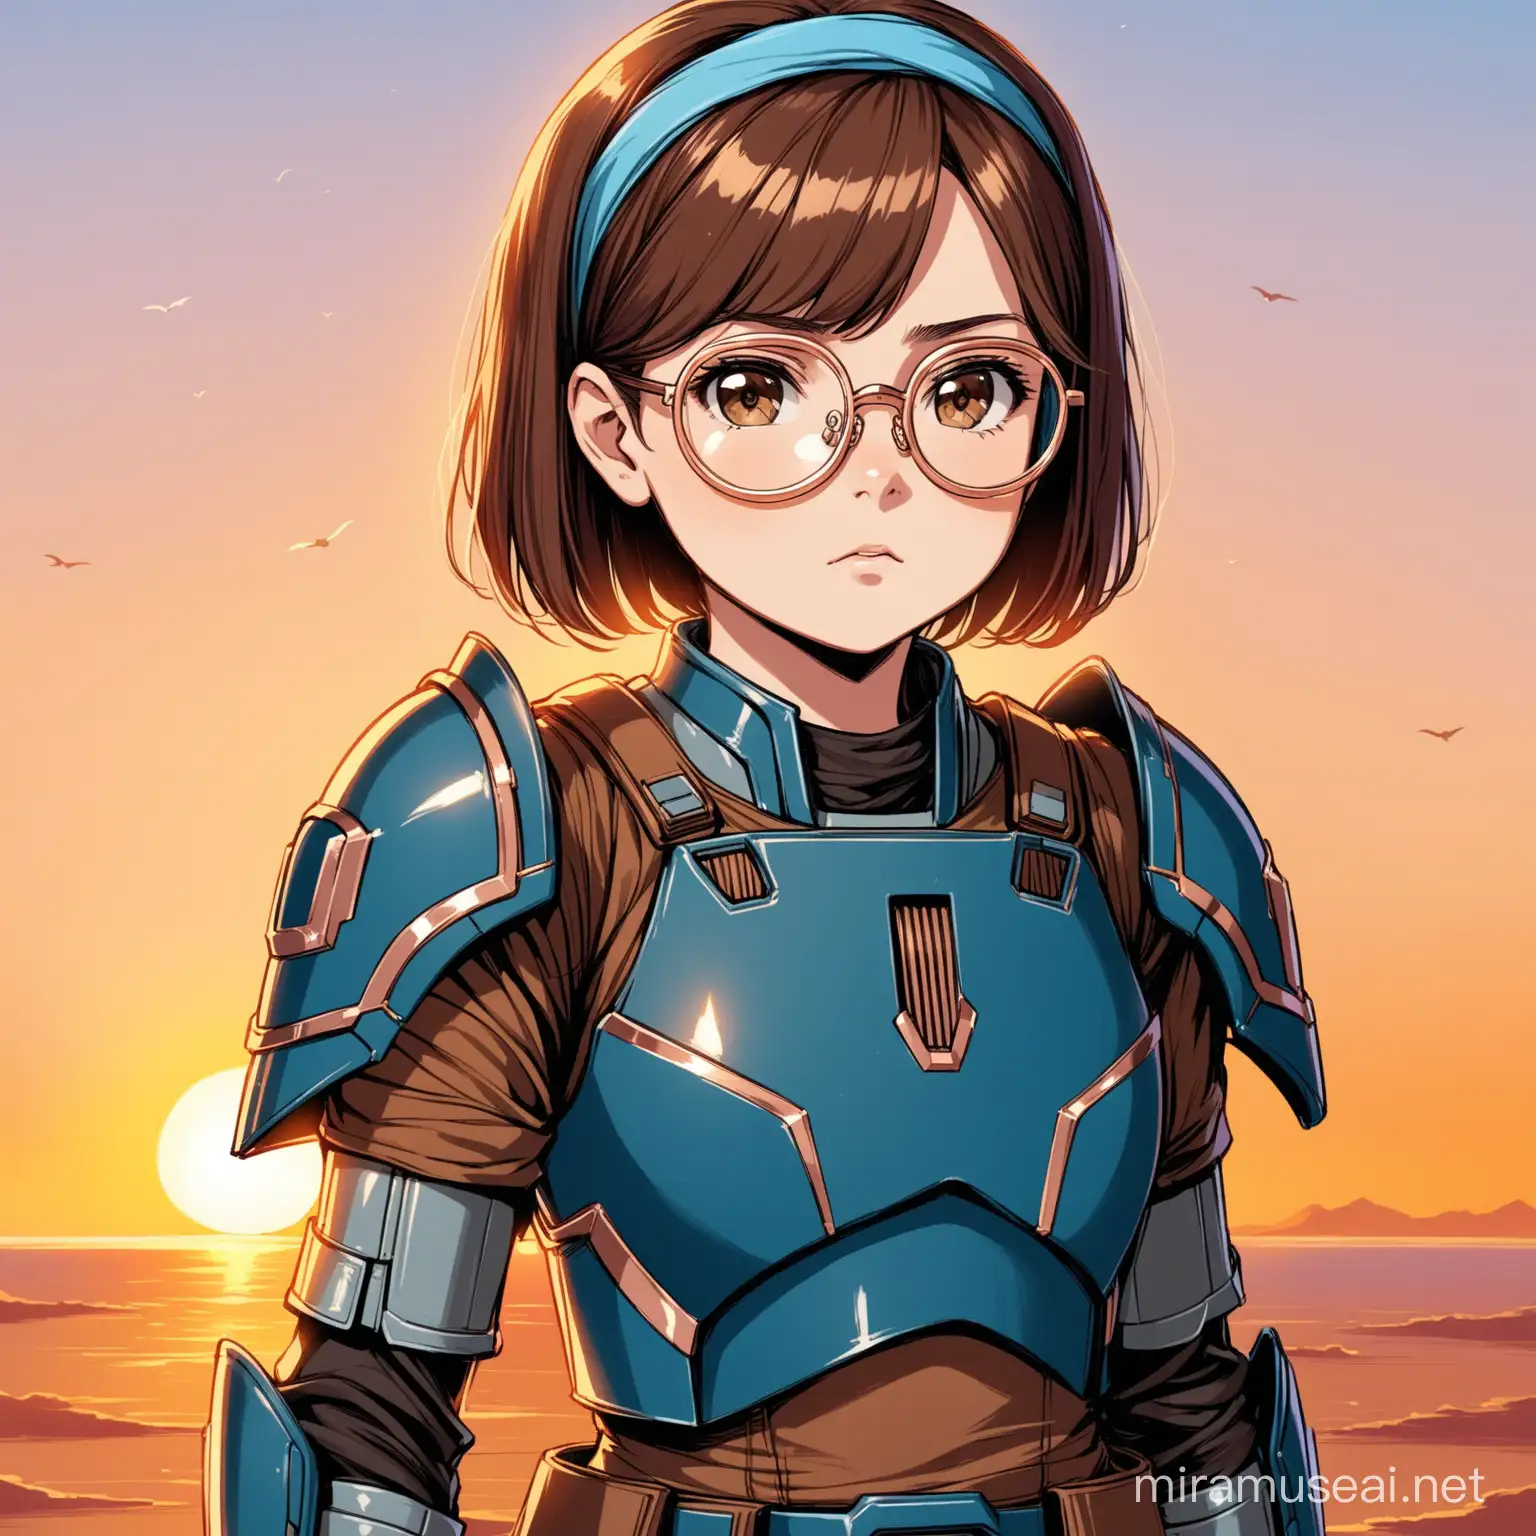 12 year old girl, short brown hair, brown eyes, rose gold glasses, determined expression, headband, wearing blue Mandalorian armour, sunset